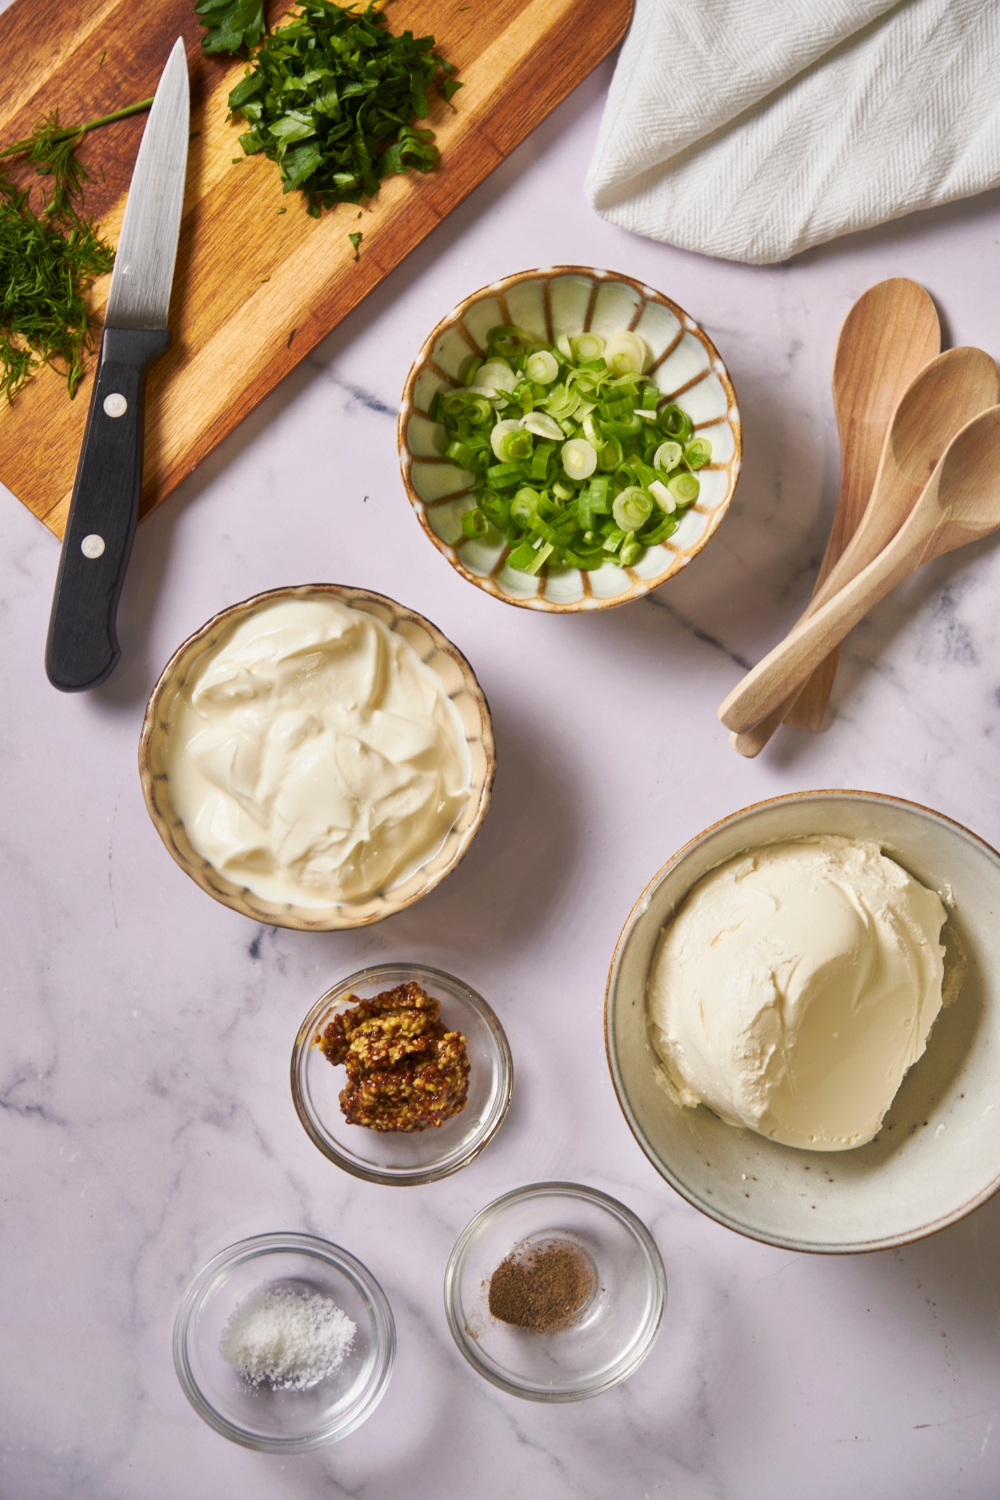 An assortment of ingredients including bowls of diced green onion, sour cream, cream cheese, and spices.